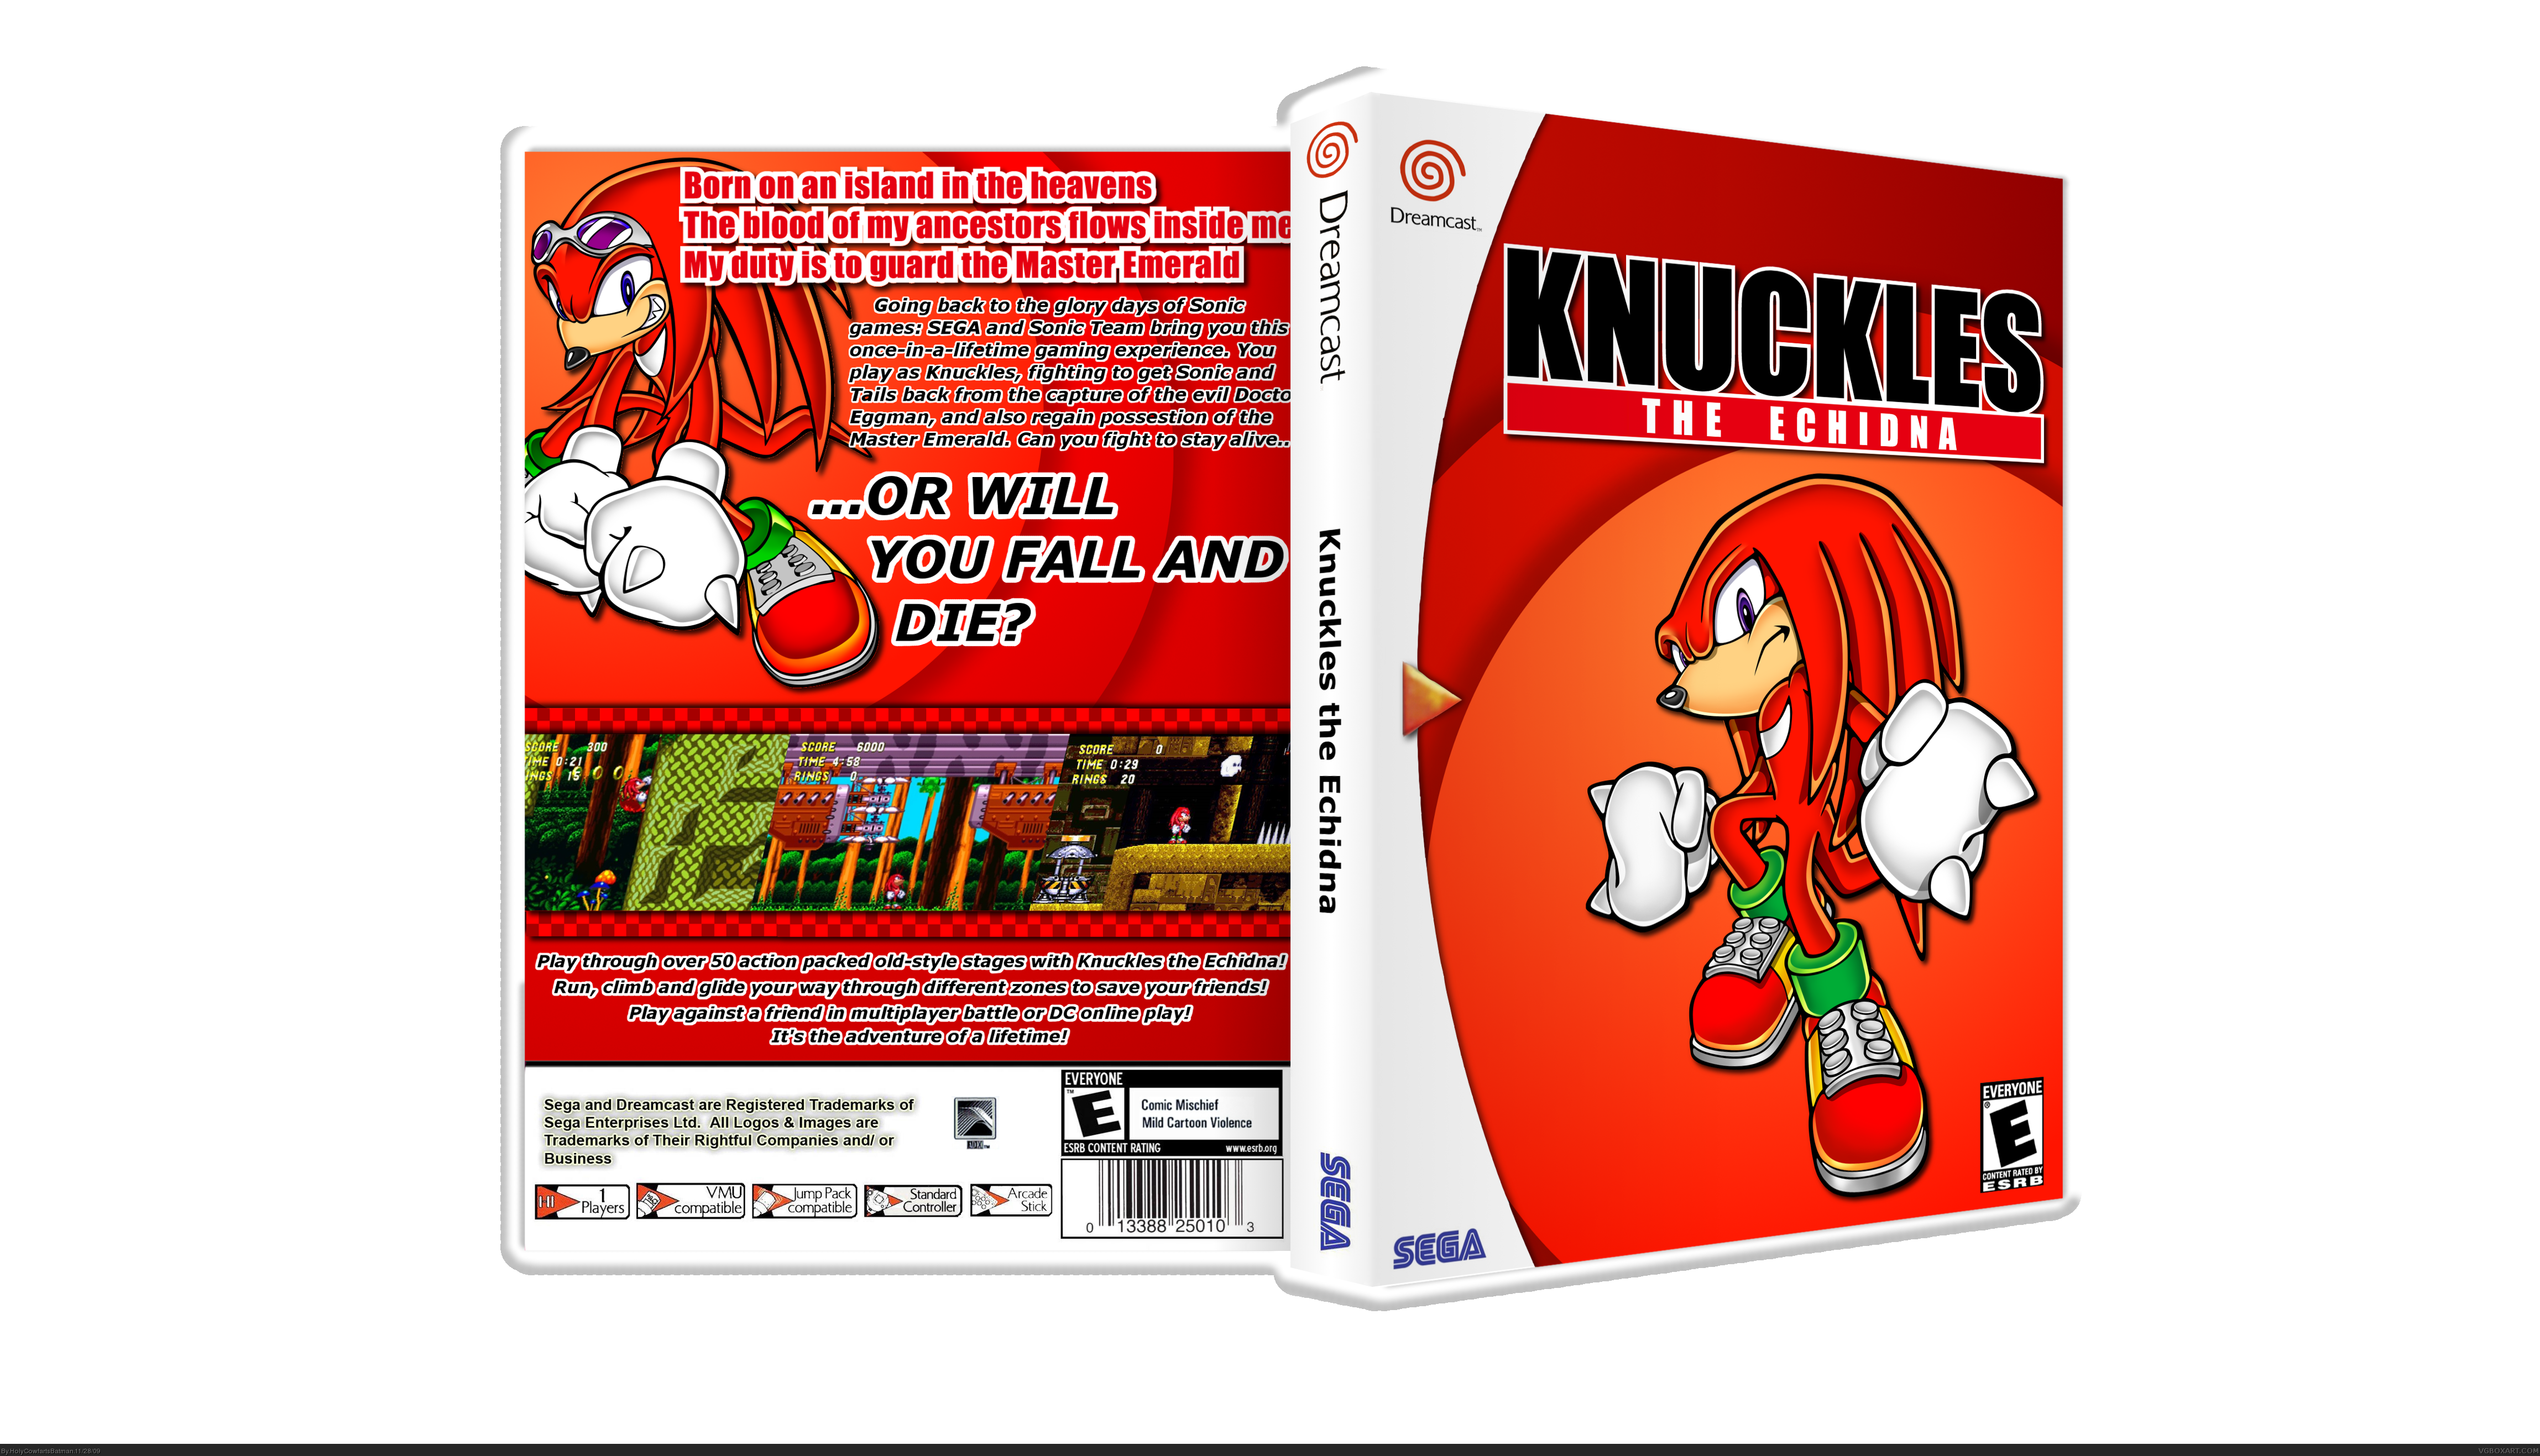 Knuckles The Echidna box cover